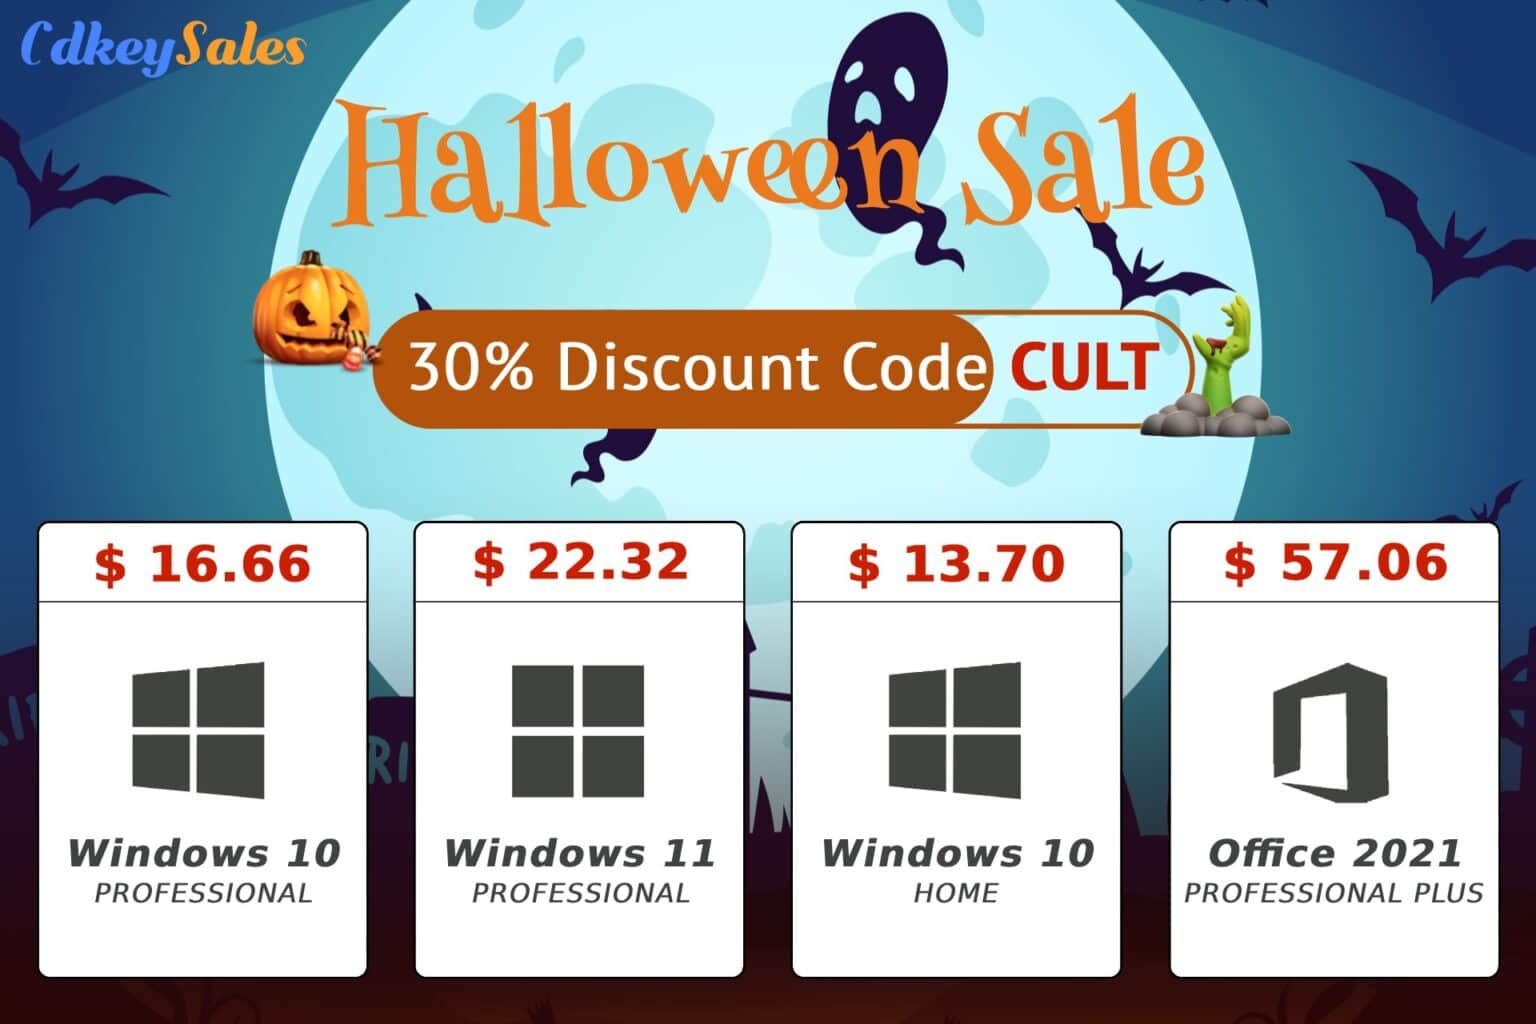 Scare up big savings on genuine Microsoft software. Just head to CdkeySales.com using these links. And don’t forget to enter promo code CULT to get extra savings.